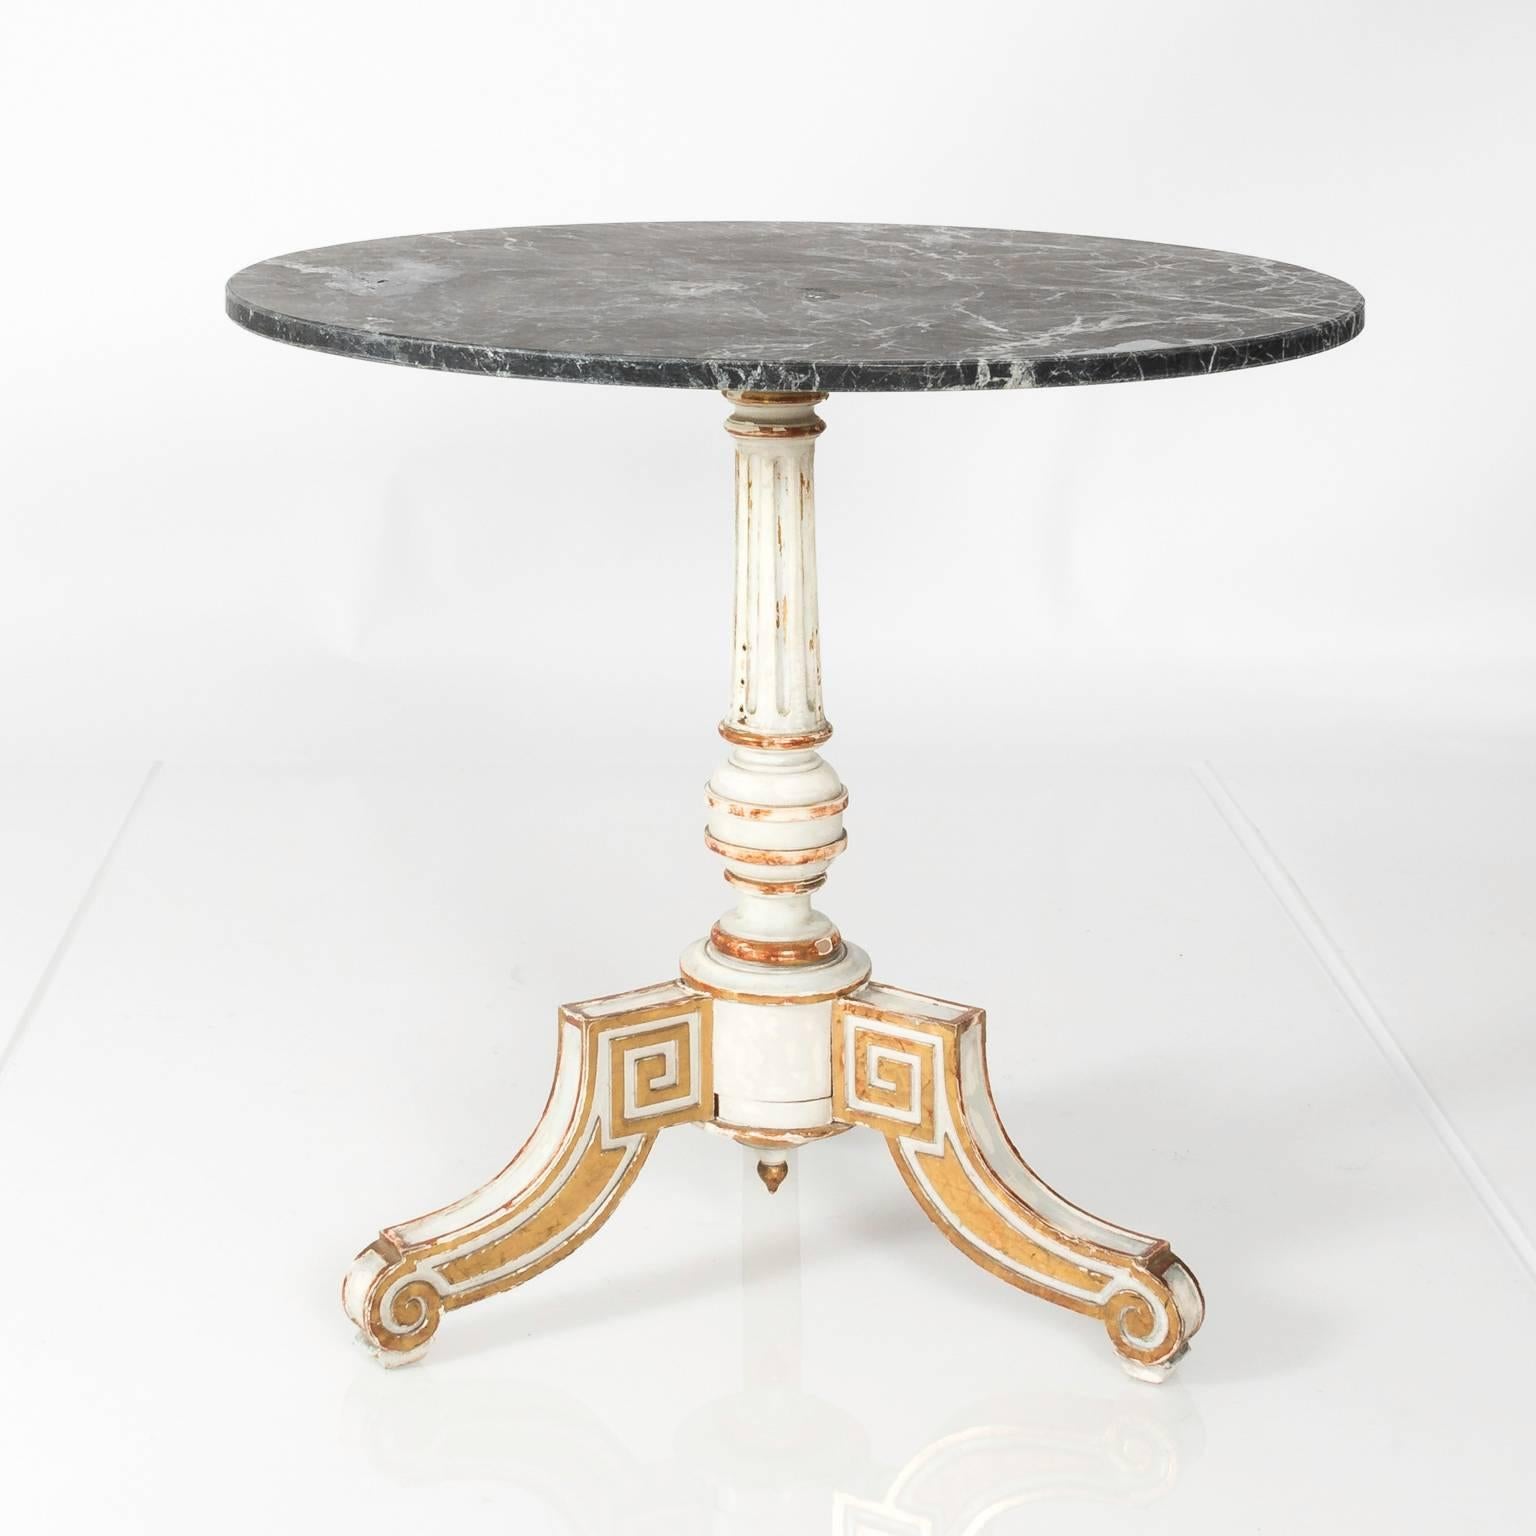 Gilt Neoclassical Round Marble-Top Pedestal Side Table, circa 1930s